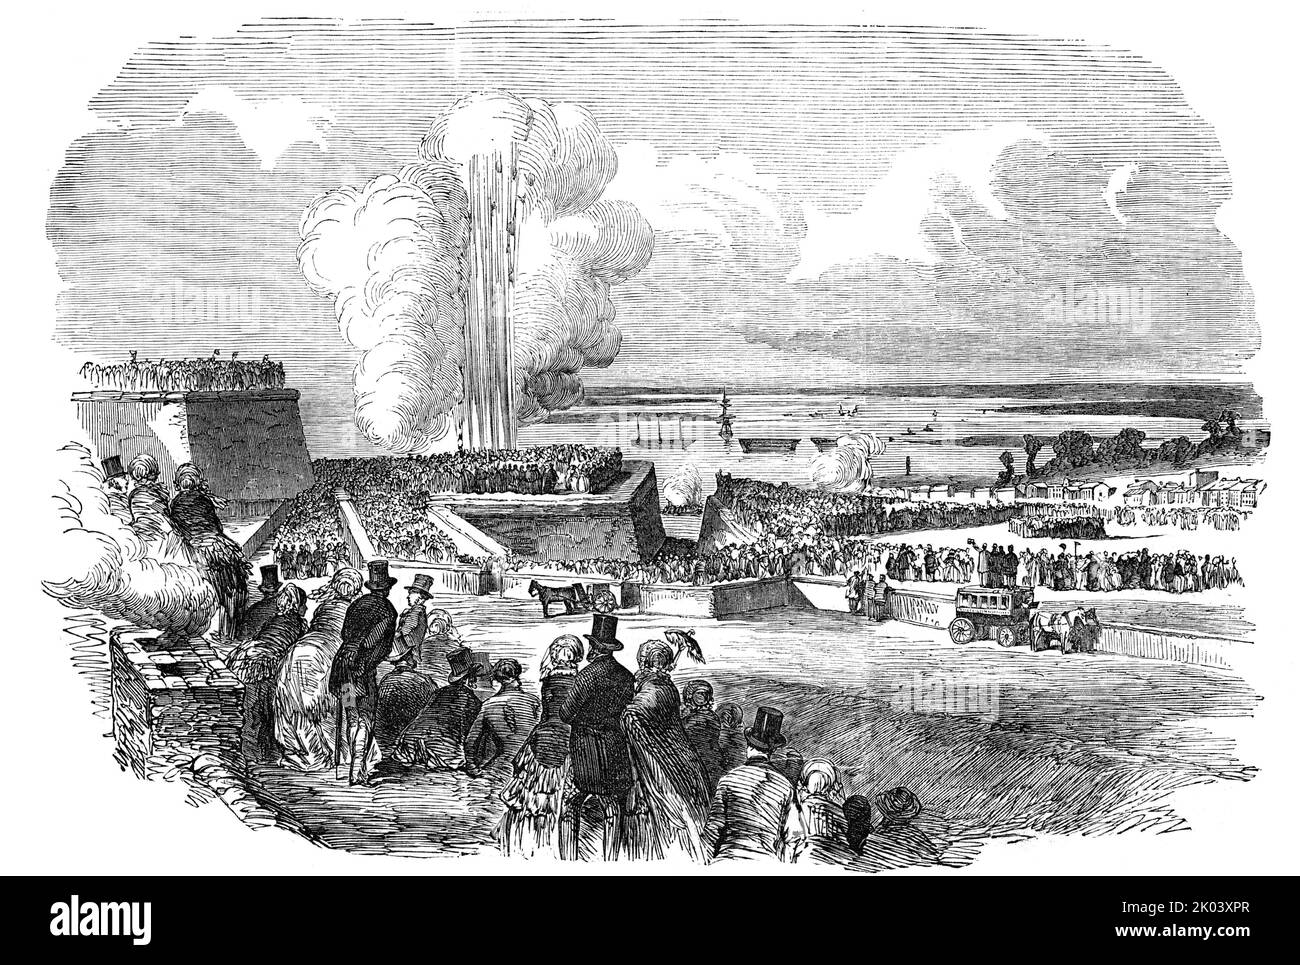 Siege Operations at Chatham - Springing a Mine, 1854. Military exercises in Kent, attended by Prince Albert. 'A column of the 34th then advanced from Gillingham Tower under a heavy fire from the 32 pounders in the battery. The Artillery and Marines occupying the battery ultimately retired after destroying it by mines, which exploded most effectually, blowing some guns off their carriages, and covering others with the earth thrown up. A stockade and several mines were then blown up by a voltaic battery. The defence of ditches of a fortified place against an assault by rockets, forgasses, hand-g Stock Photo